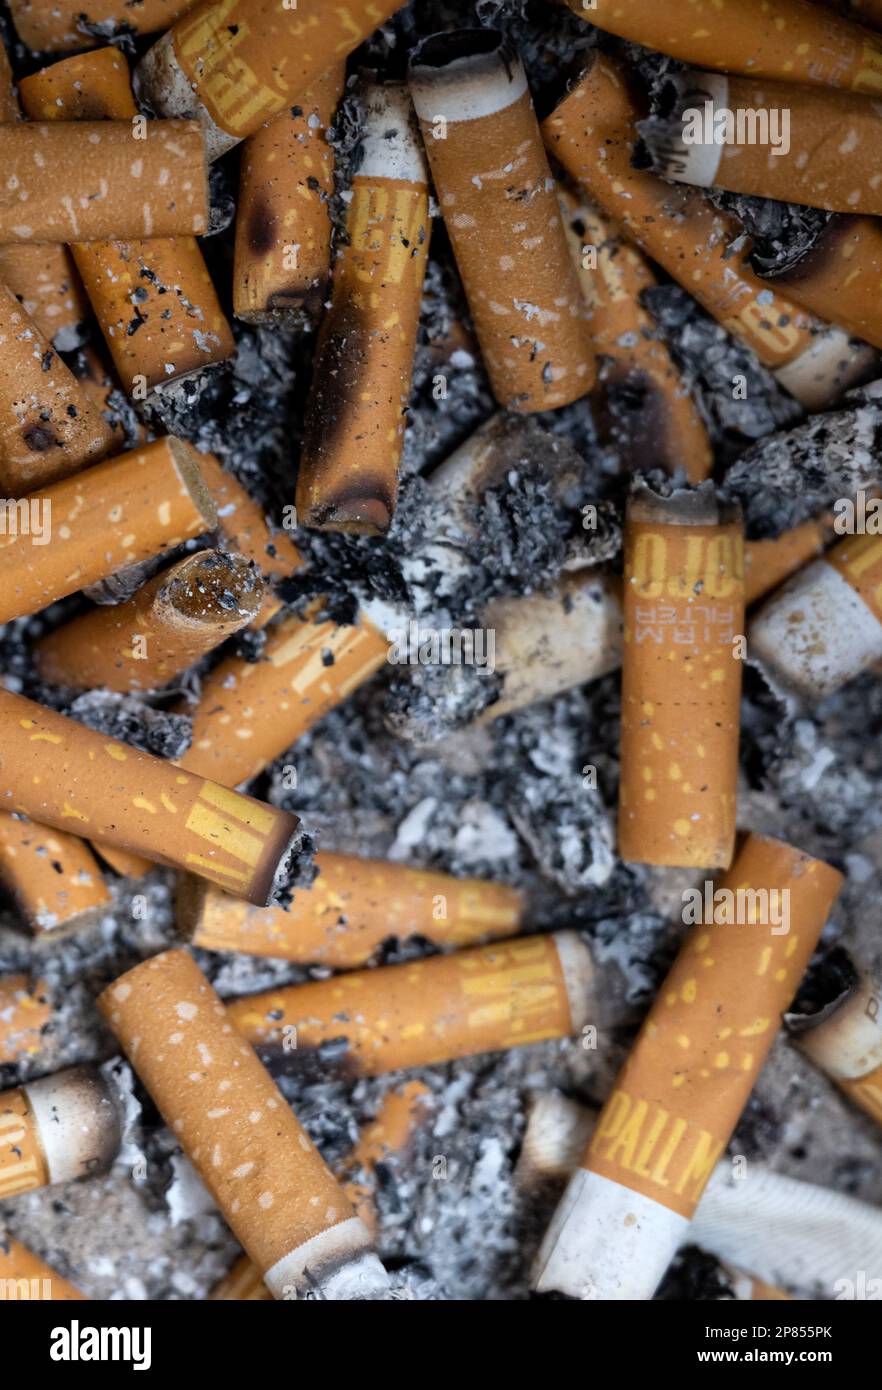 ILLUSTRATION - 06 March 2023, Bavaria, Munich: Numerous cigarette butts lie  in an ashtray. (recrop) On March 9, the ECJ ruling on warnings for the sale of  cigarettes in vending machines is